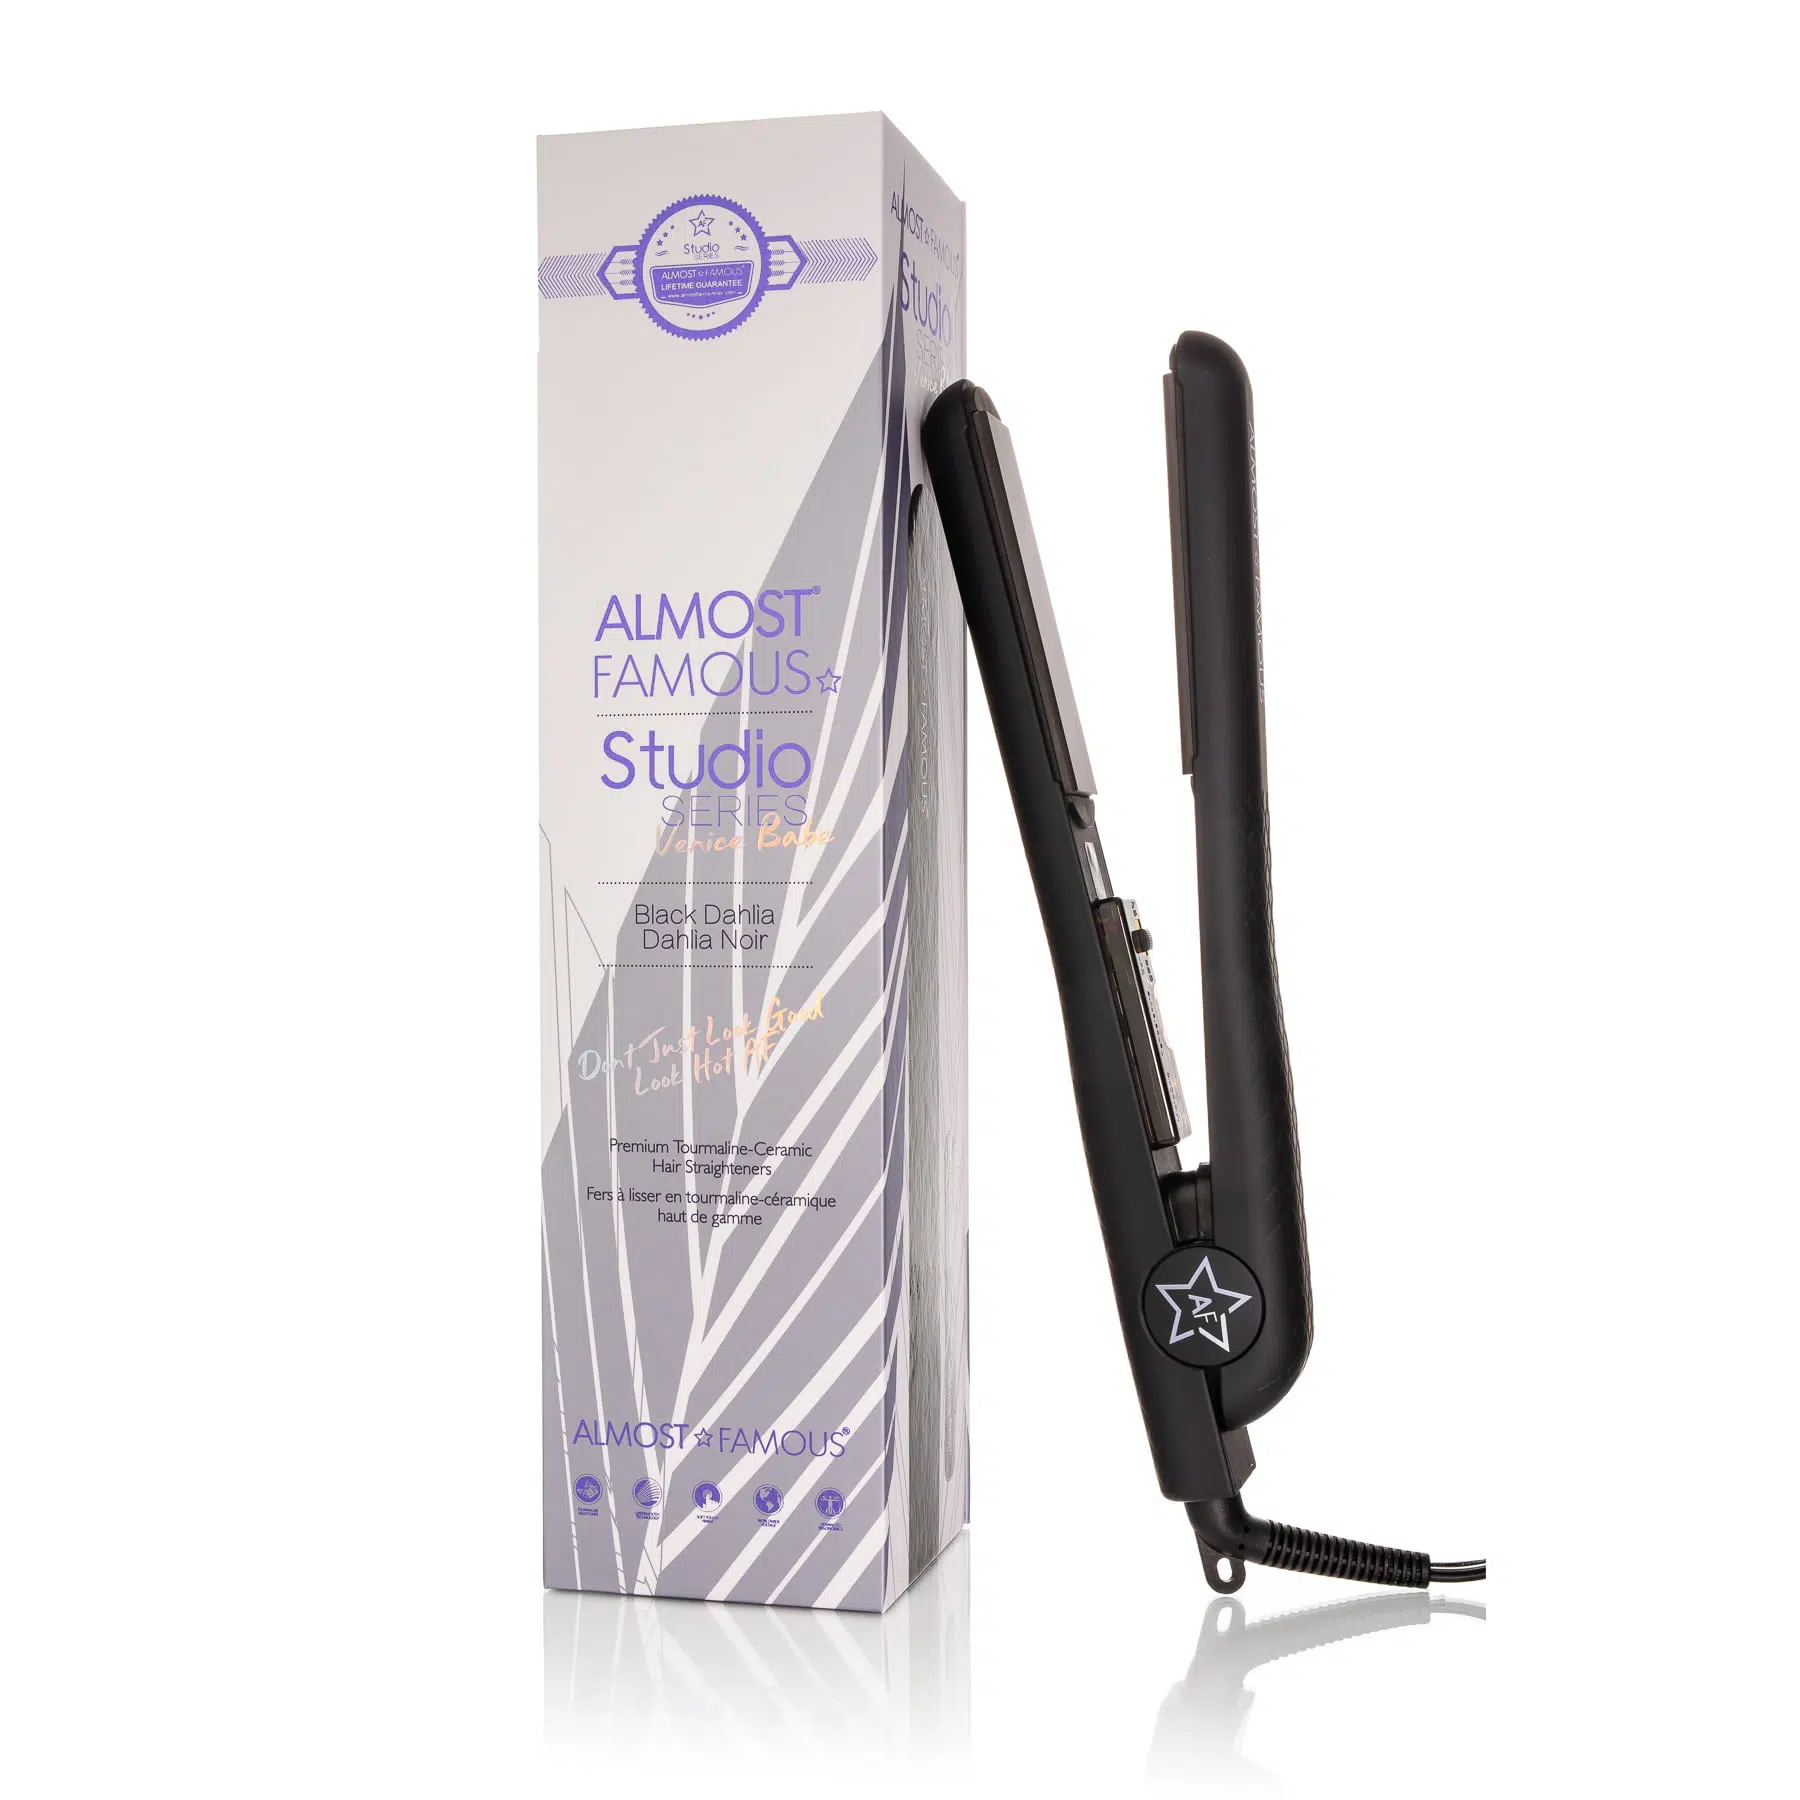 Almost Famous Venice Babe Flat Iron Luxe Gem Infused Plates Hair straightener